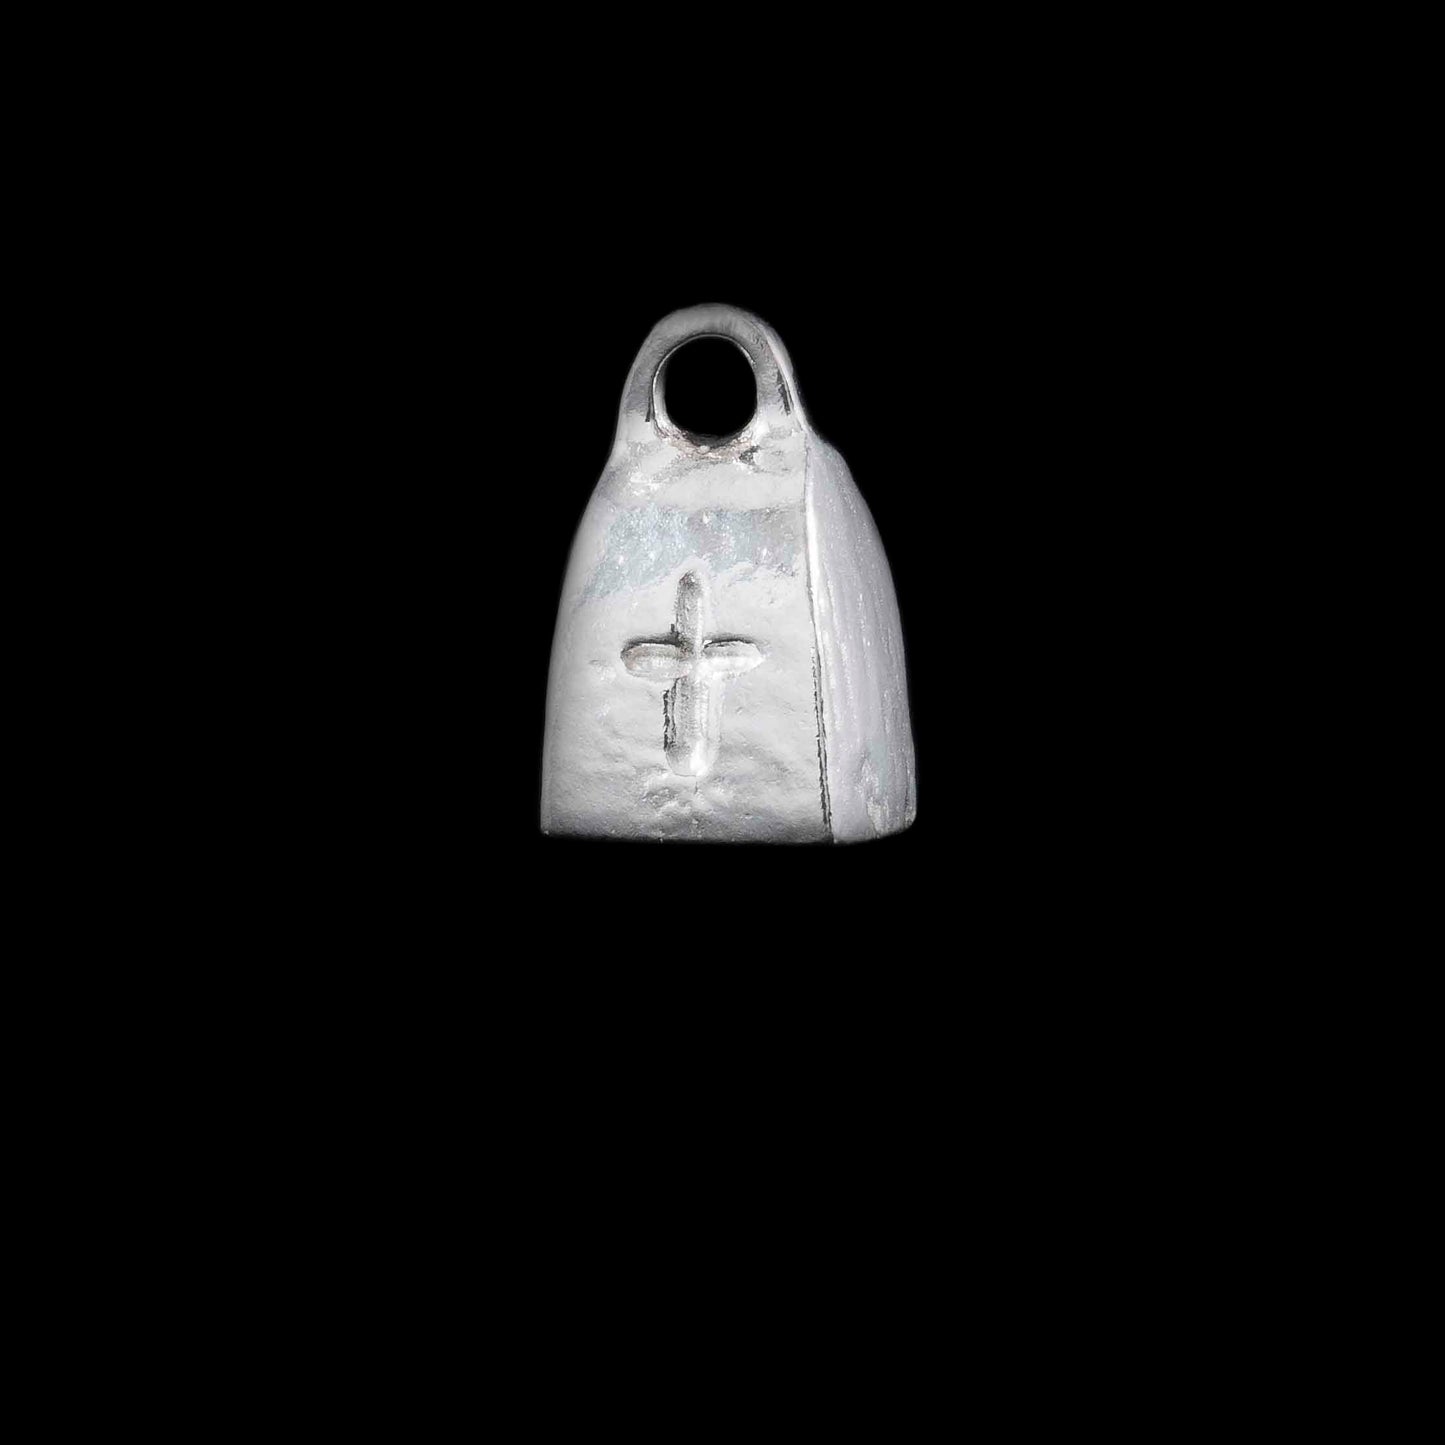 Bangor Bell Silver Charm - Saint Comgall made of sterling 925 UK silver charm and is inspired by Bangor Abbey's bell.  St Comgall founded a monastery on the site in c.558.